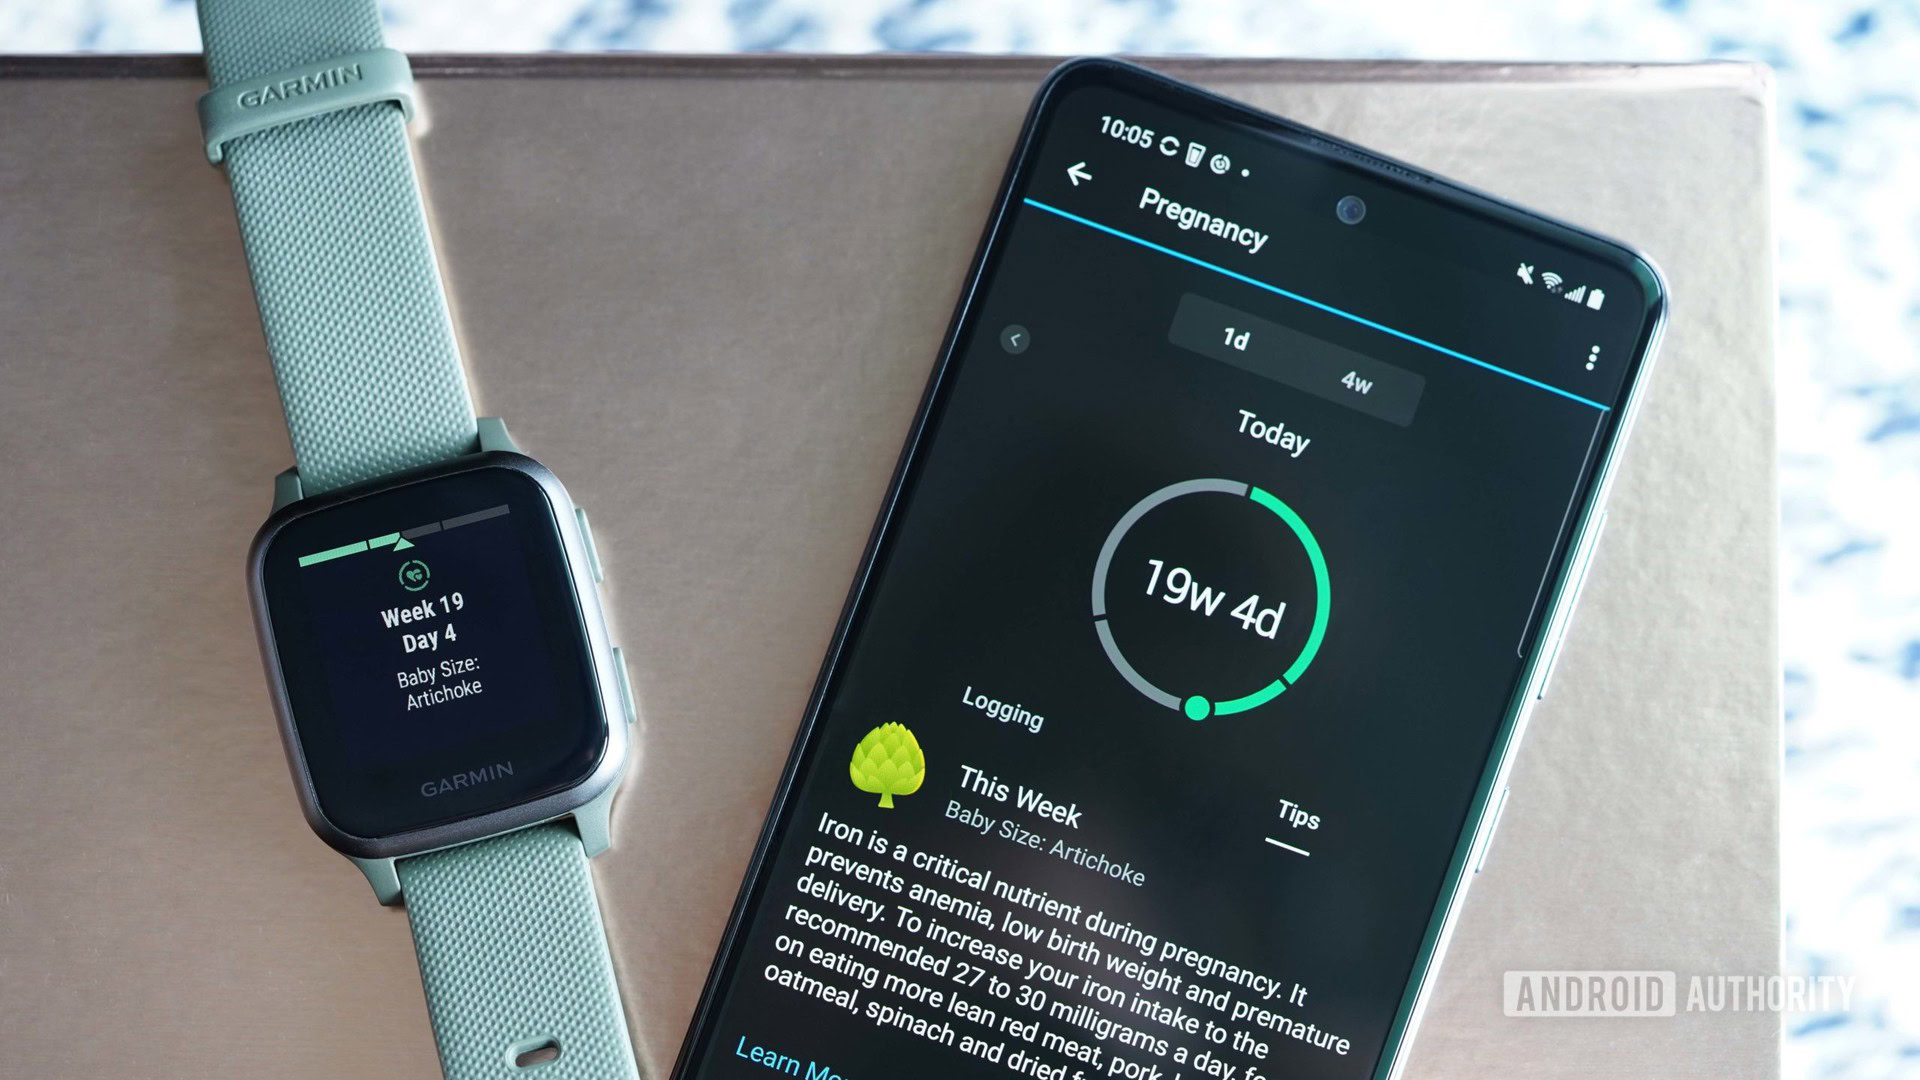 On a gold surface, a Garmin Venu Sq displays Pregnancy Tracking, alongside a paired Galaxy A51 open to the same feature in the Garmin Connect app.